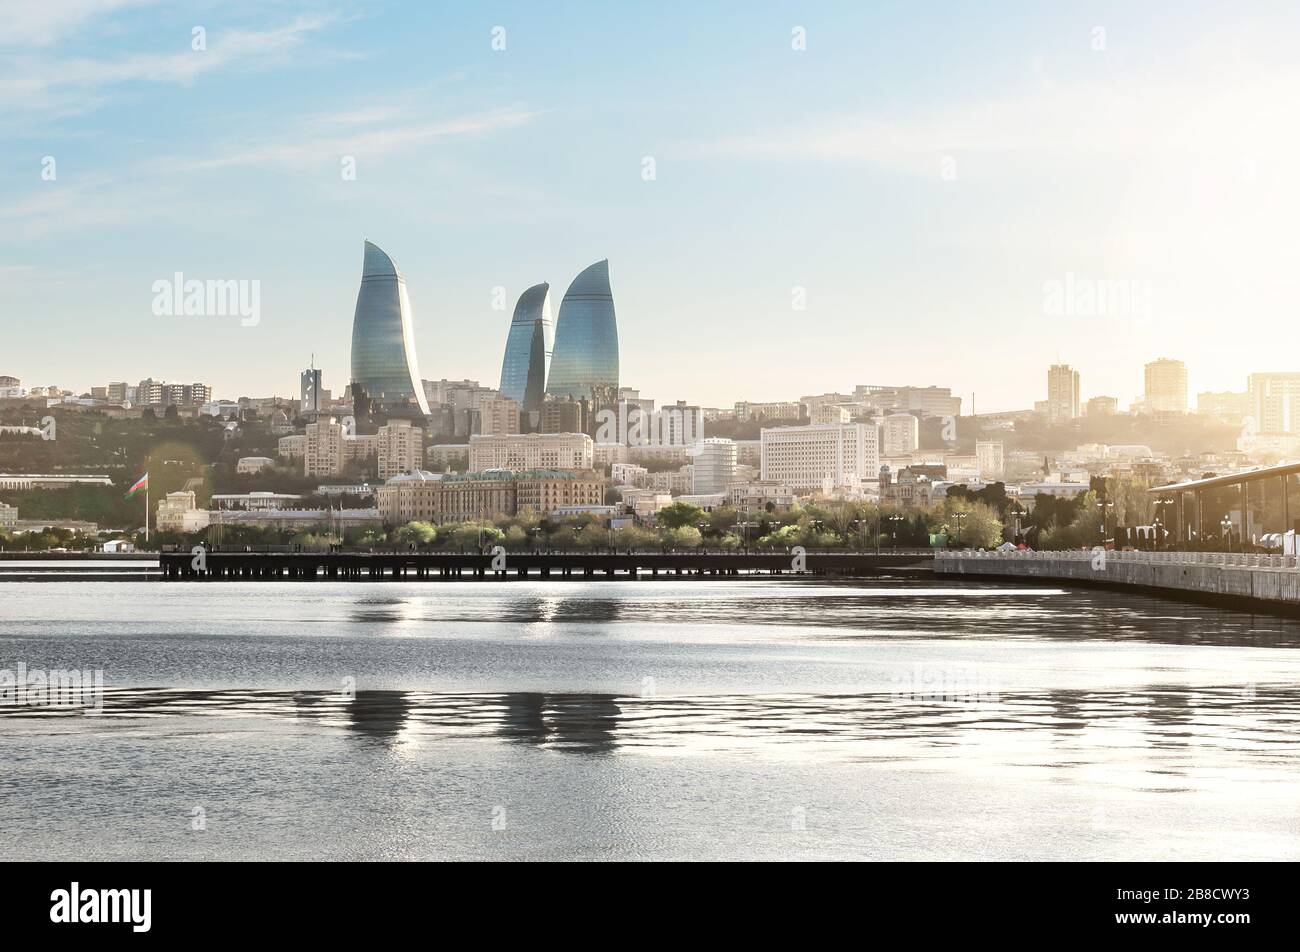 Baku city at sunset. Panoramic view of the skyline with sea boulevard, pier and Flame towers in the background. The capital city of Azerbaijan. Stock Photo